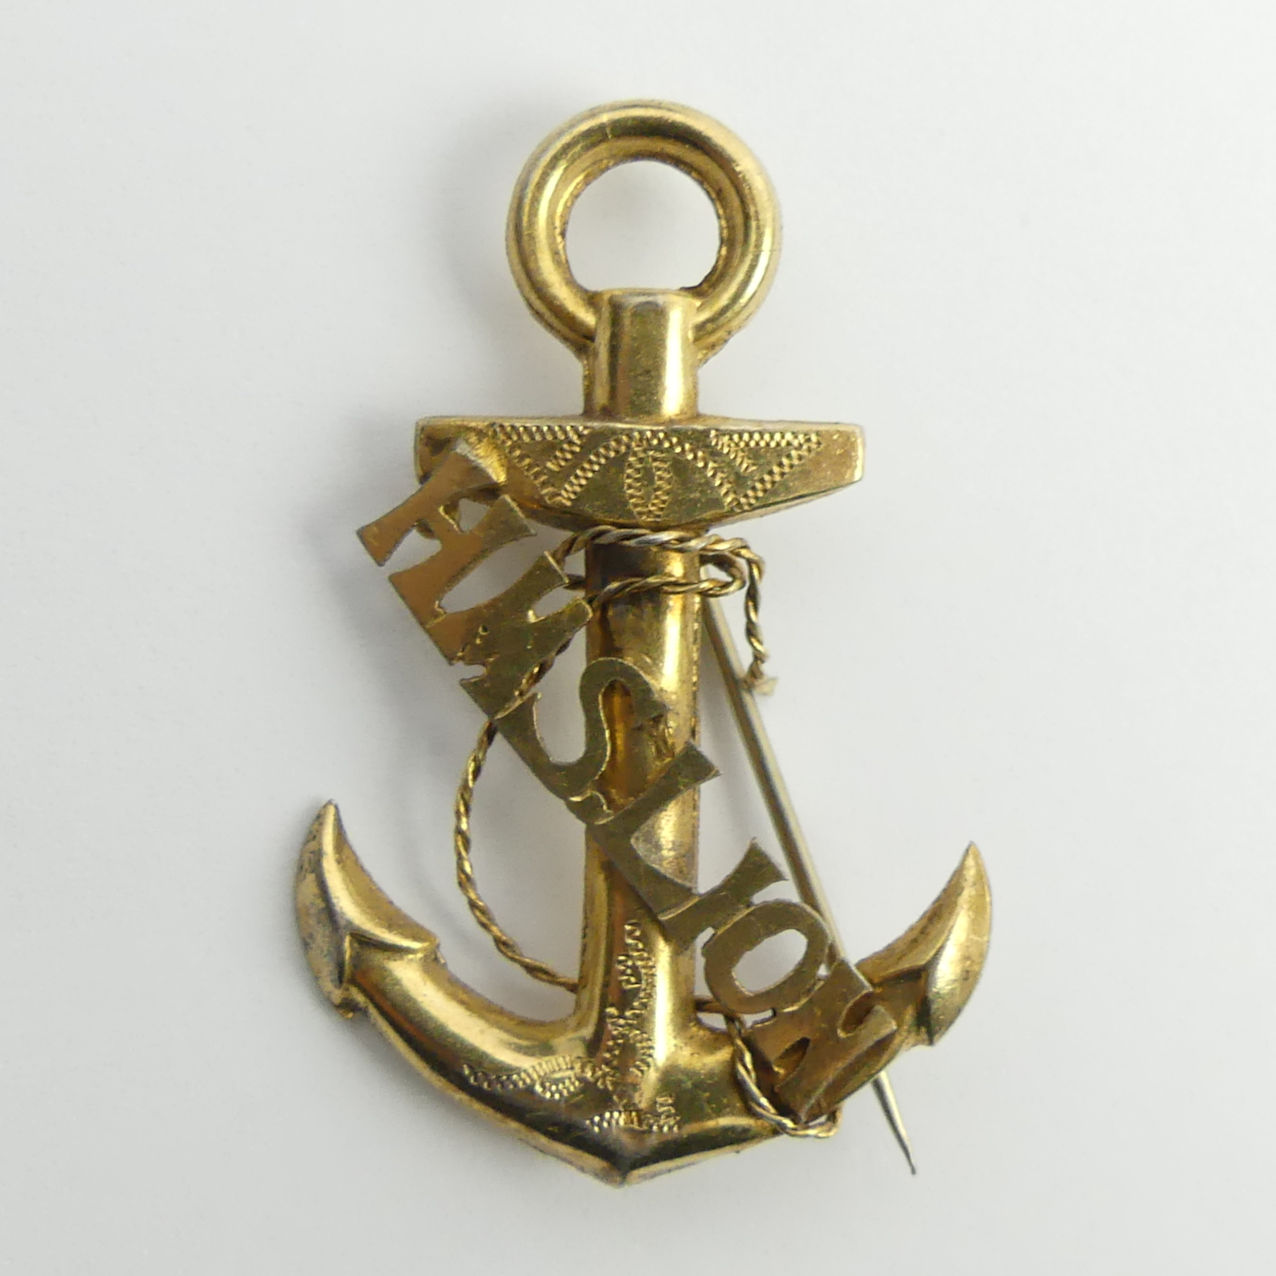 9ct gold sweetheart brooch, HMS Lion, Chester 1914, 2.5 grams, 39mm x 25mm.